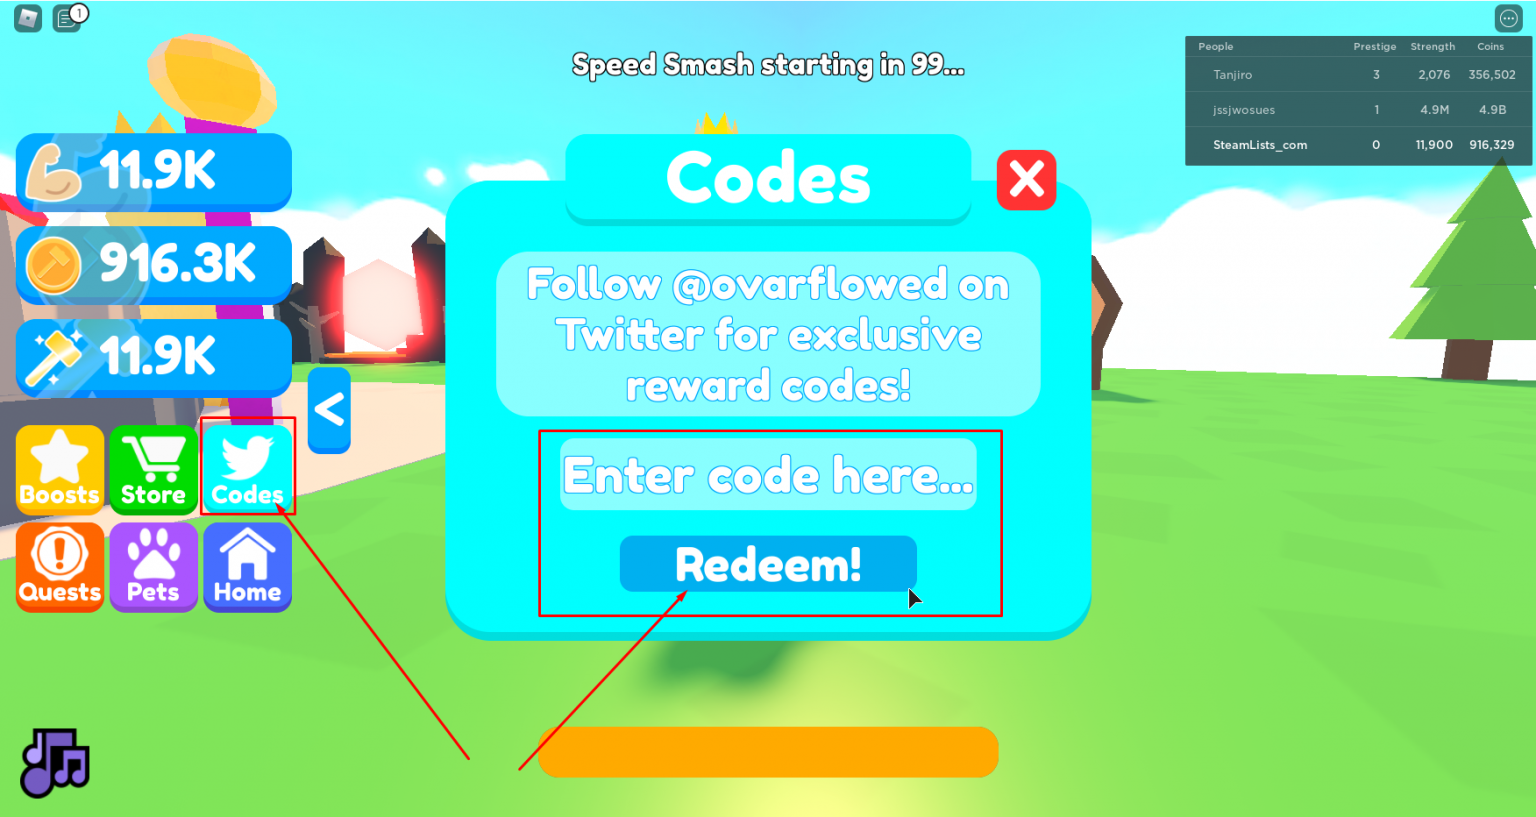 roblox-smash-legends-codes-free-coins-strength-and-boosts-july-2021-steam-lists